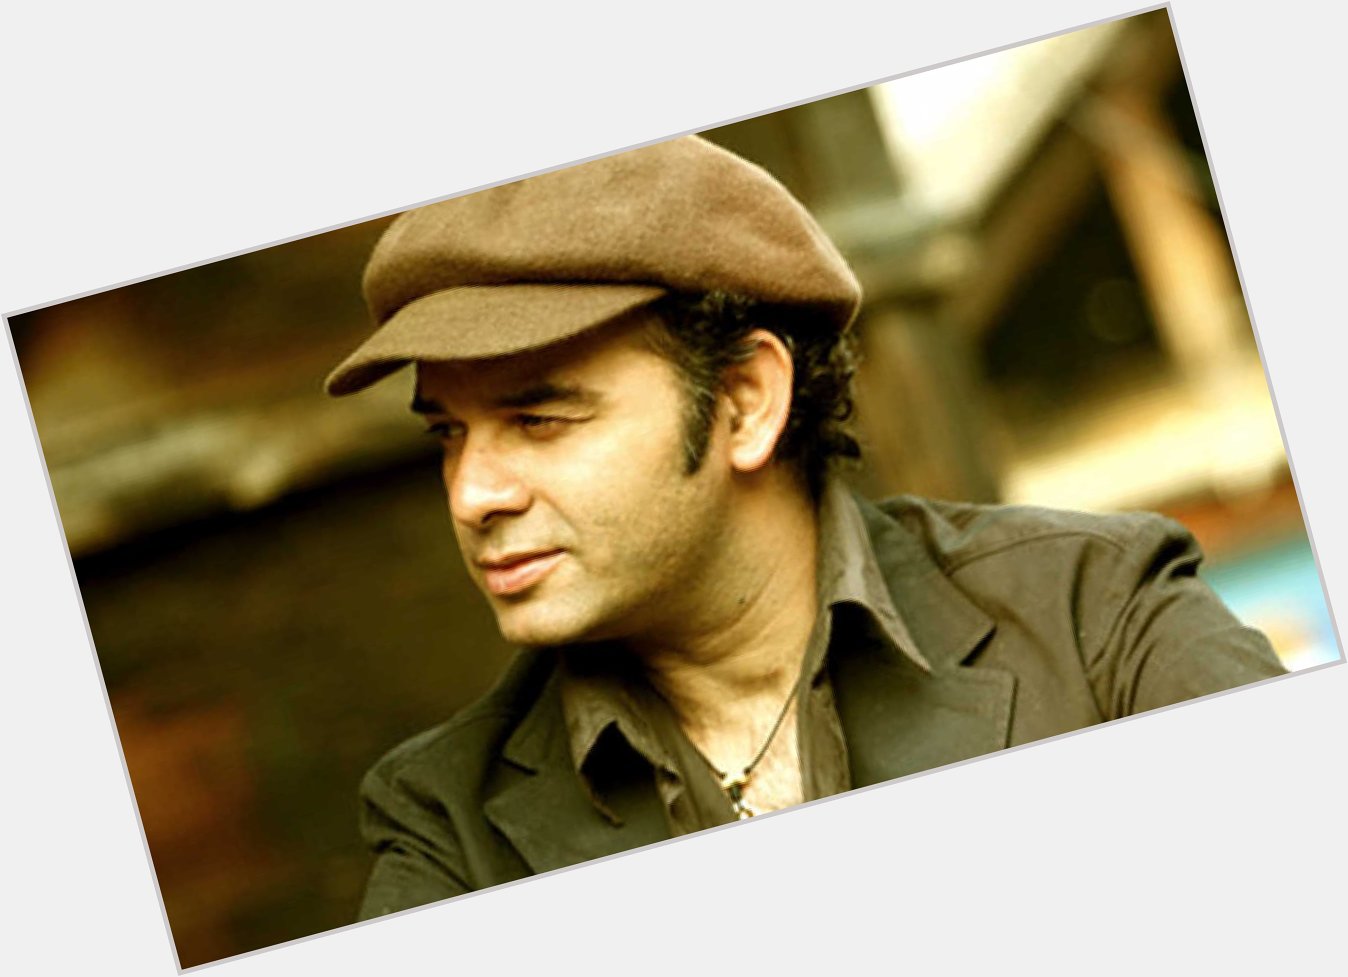 A Noble Soul, A Nobel Voice 

HAPPY BIRTHDAY MOHIT CHAUHAN  